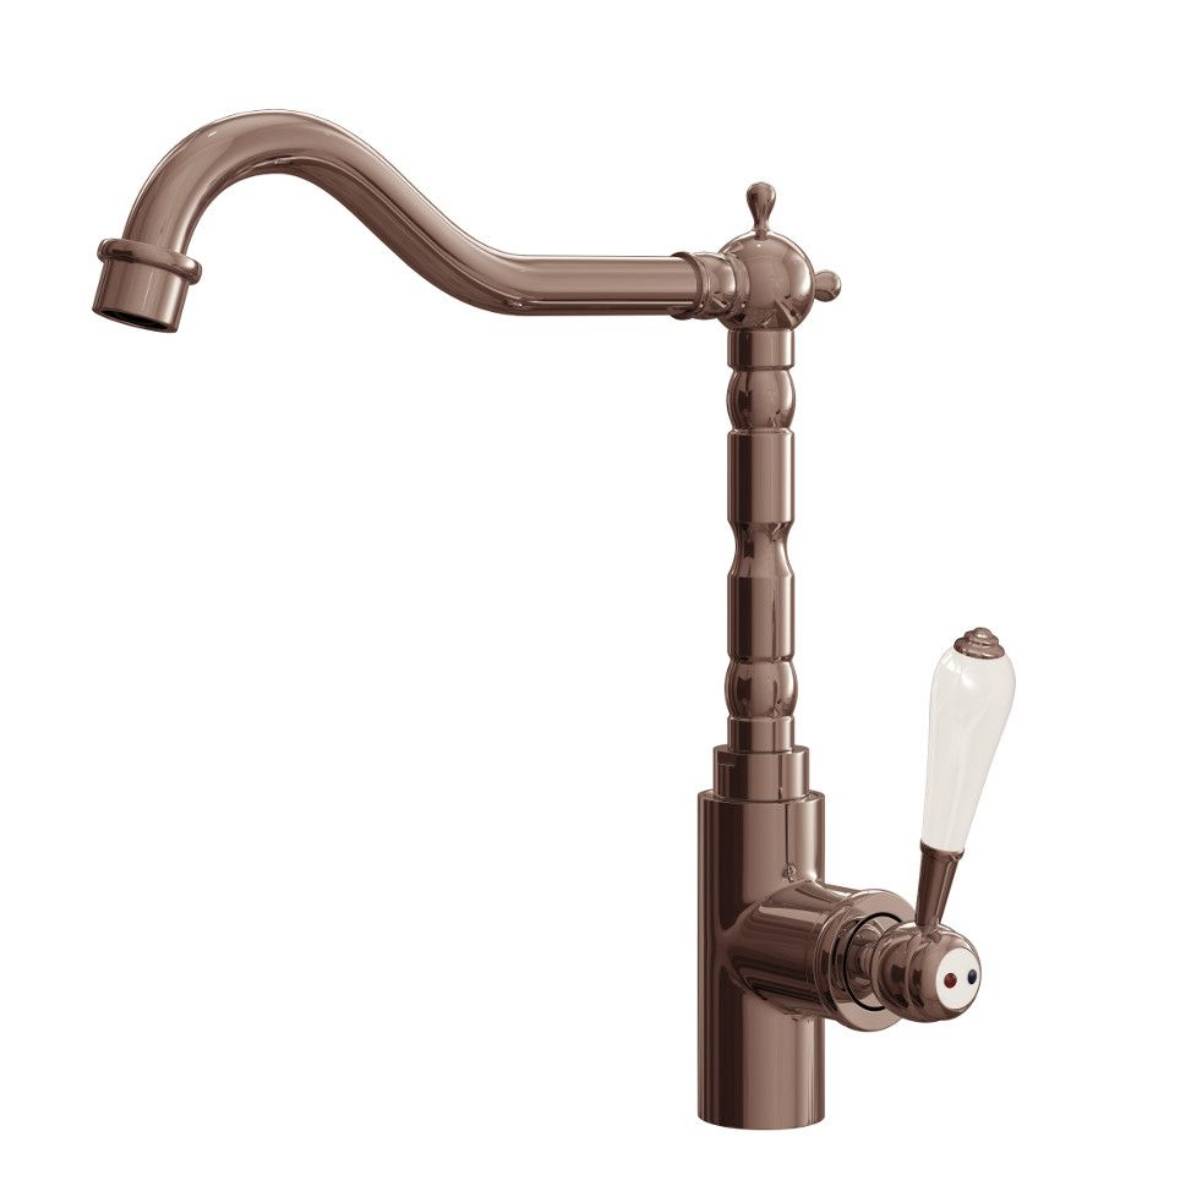 Empire Traditional Style Kitchen Sink Mixer with Swivel Spout & Single Lever - Brushed Copper Finish (10957)